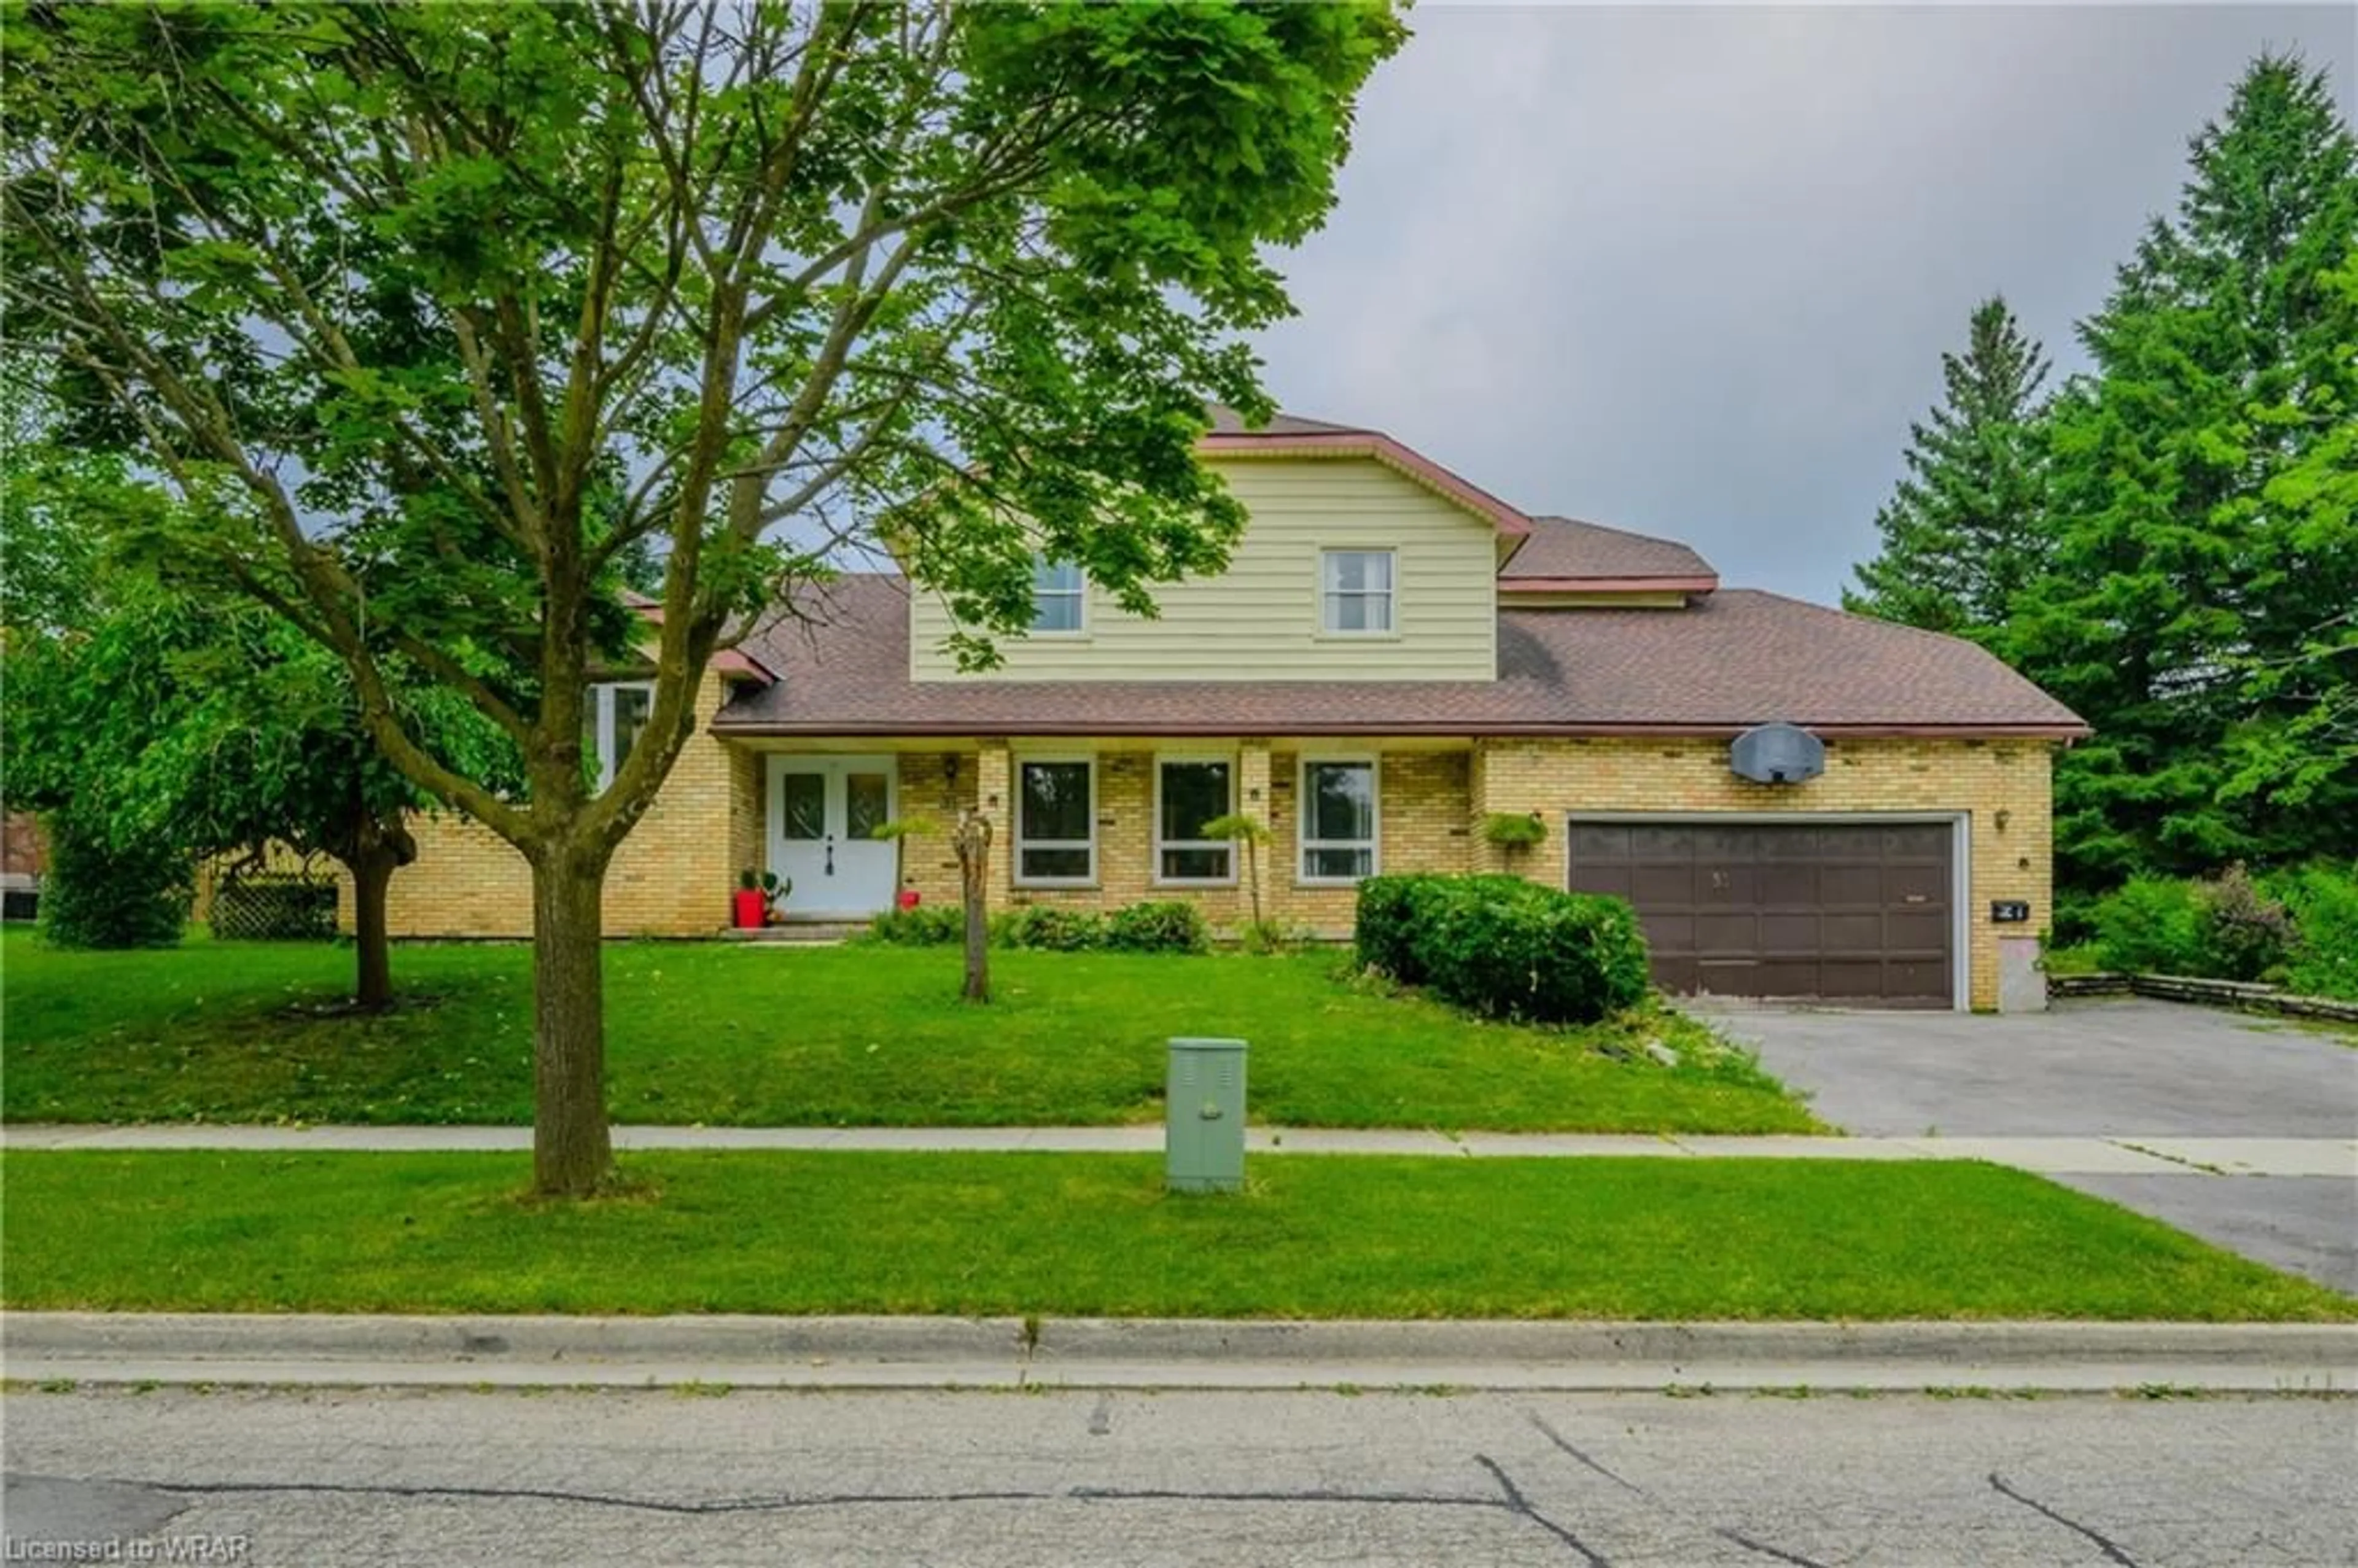 Frontside or backside of a home for 31 Albion St, Kitchener Ontario N2E 2R9